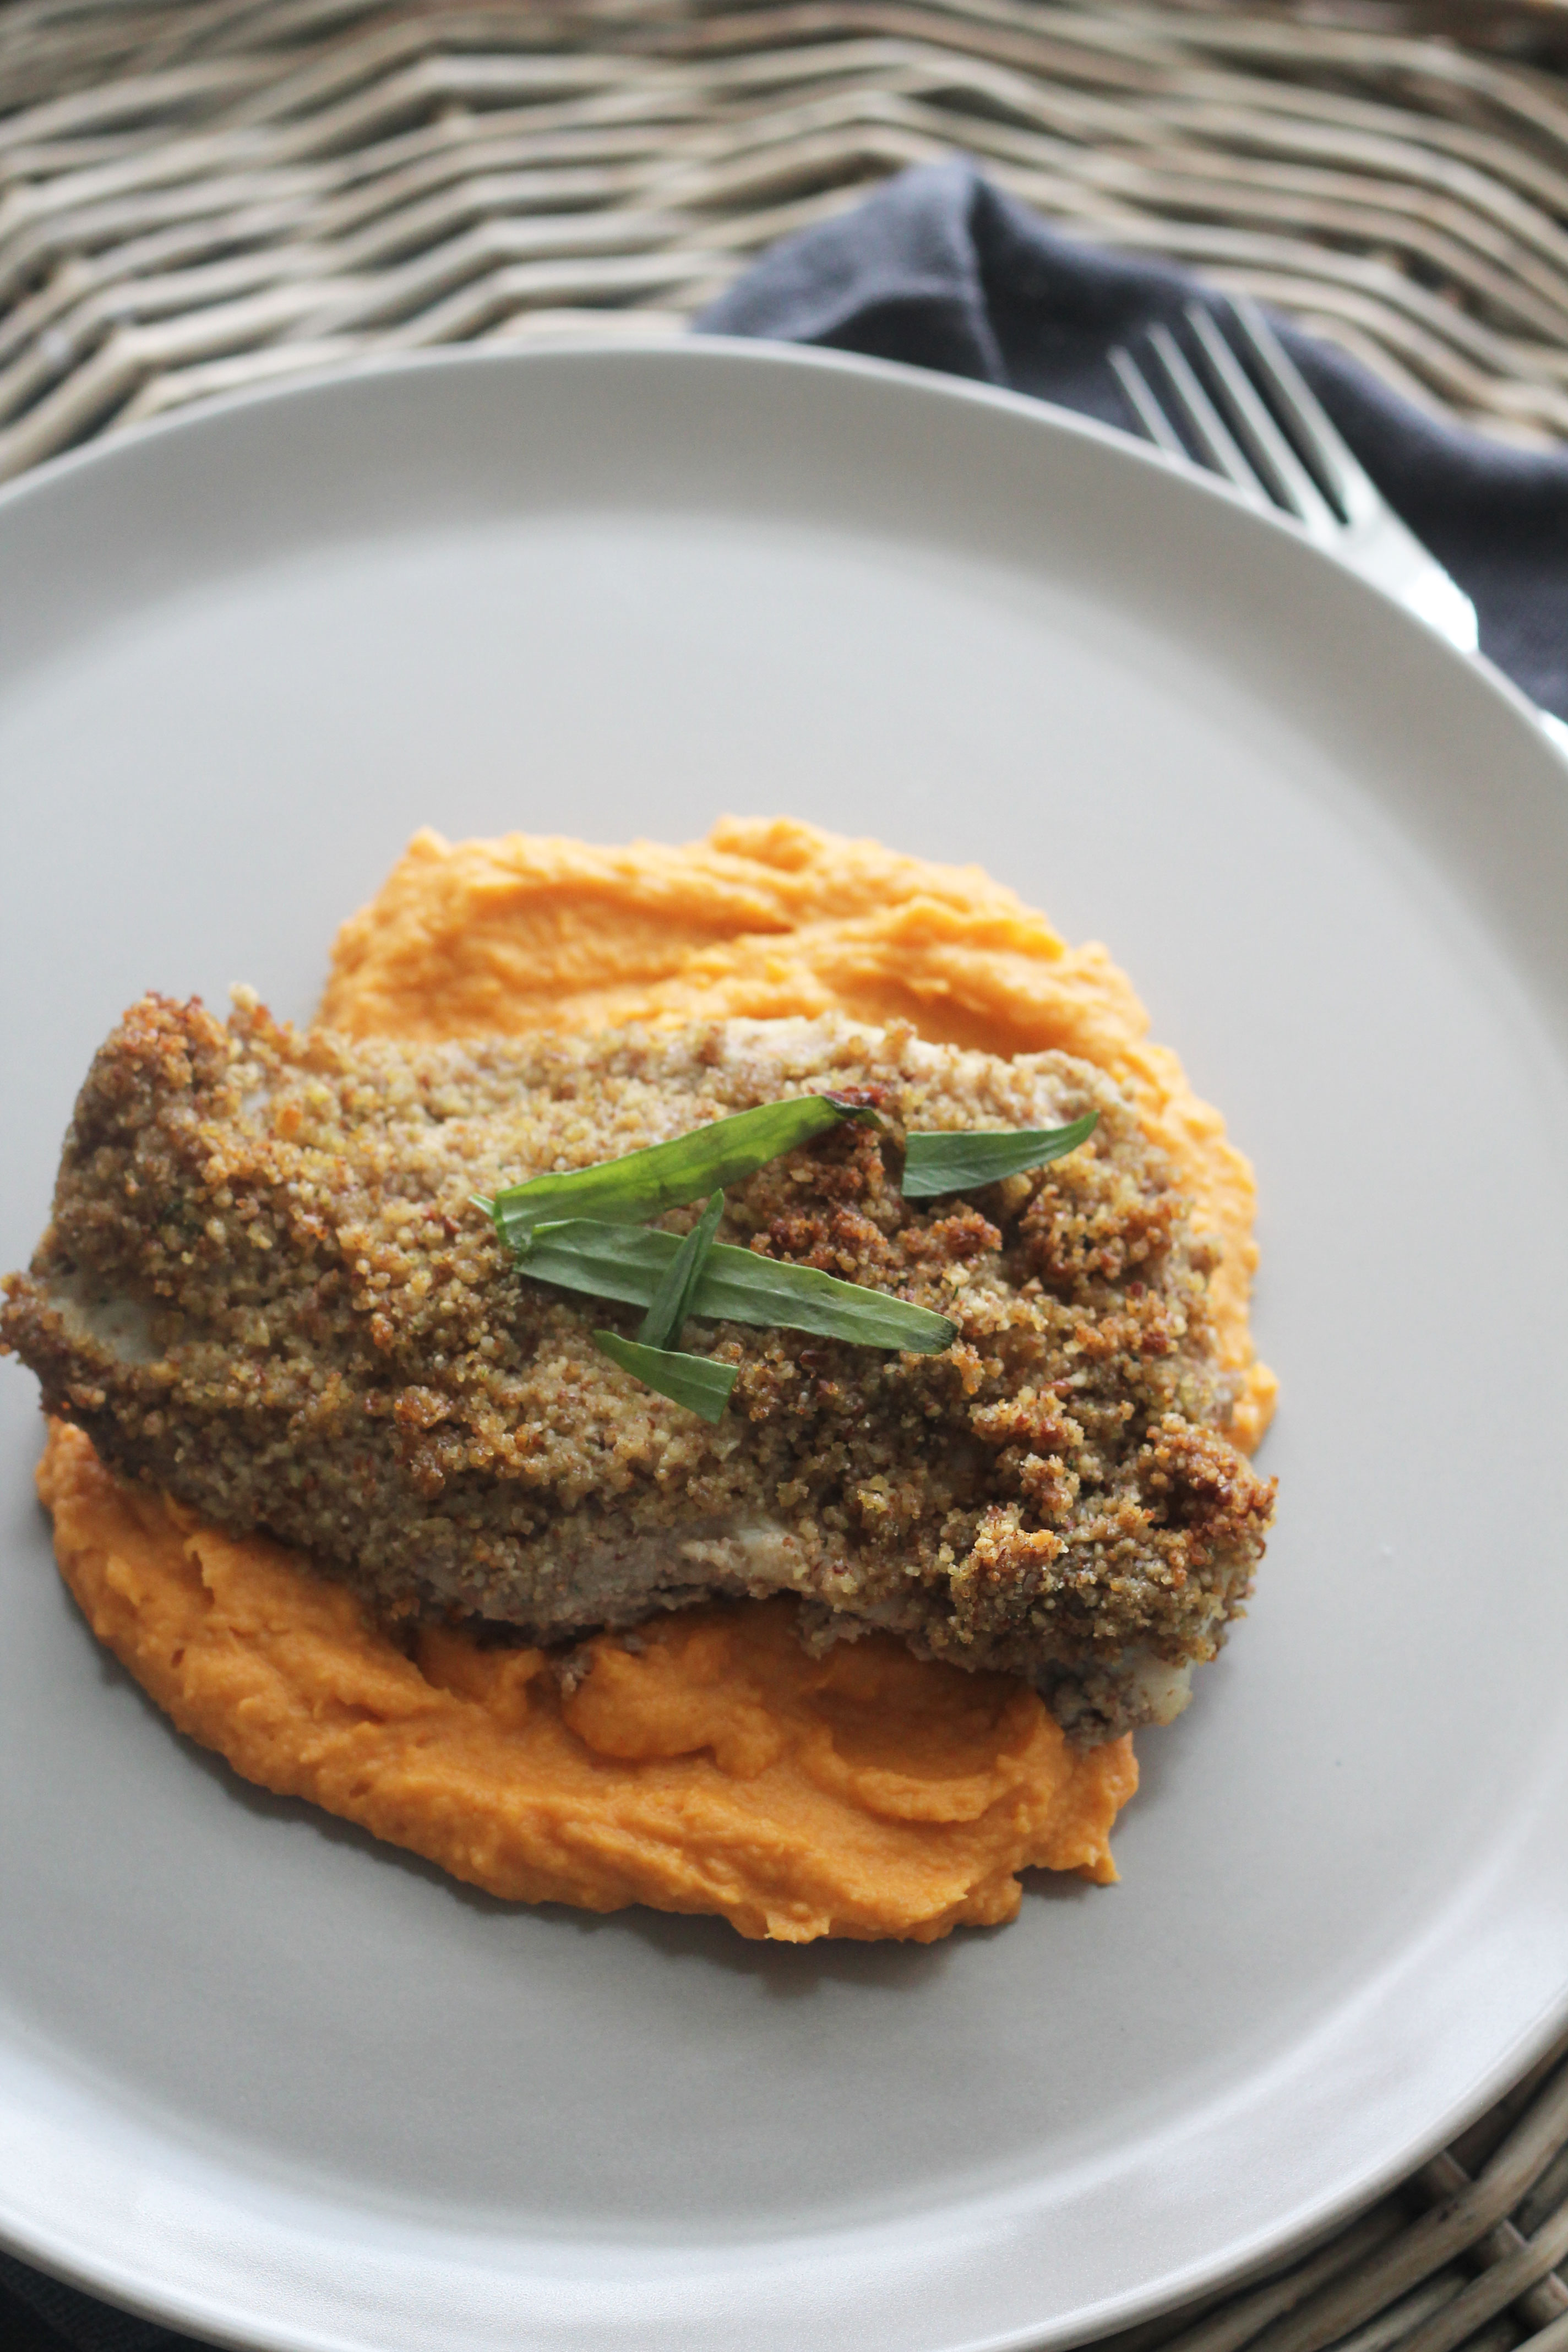 This Pecan Crusted Snapper with Sweet Potato Puree looks fancy enough for a nice dinner but quick and easy to make it a weeknight favorite!